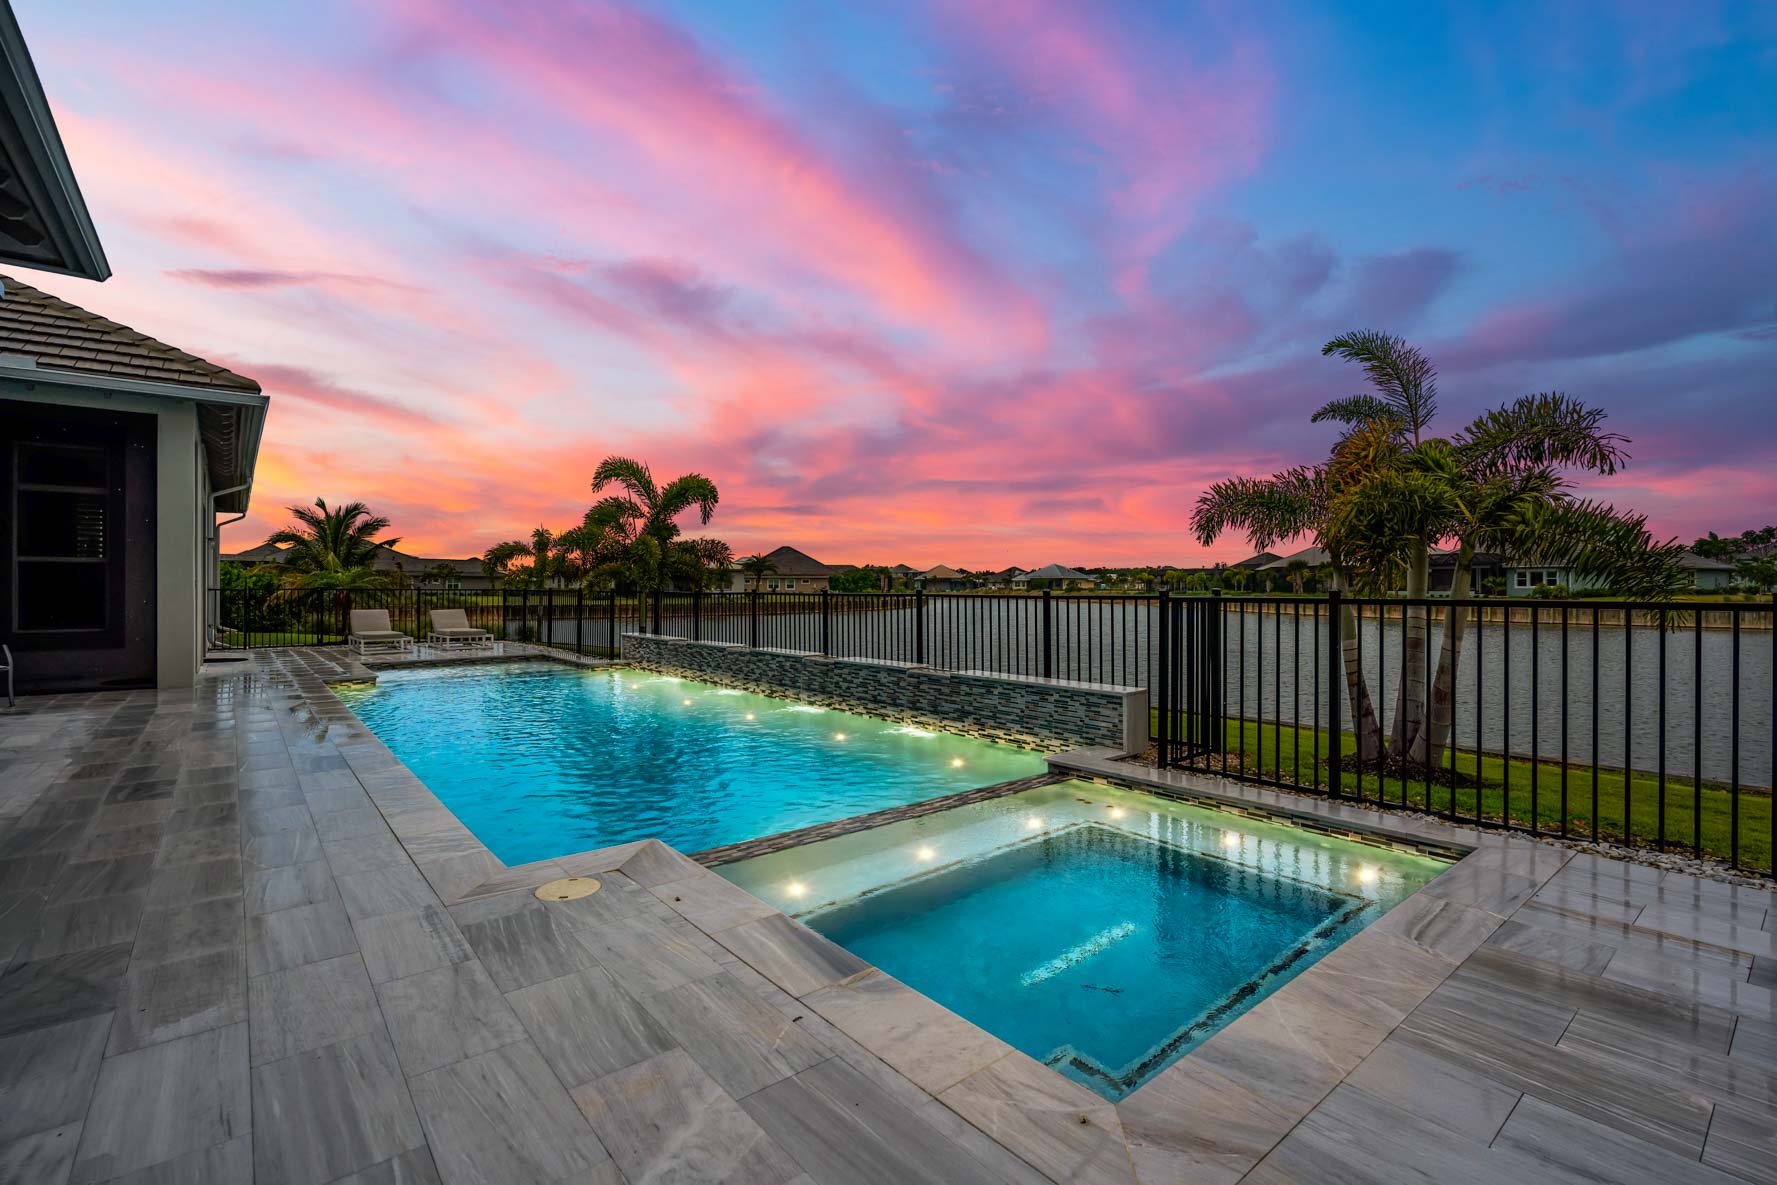 6230 Lightbourn Way - Mansion Pool and Hot Tub Overlooking Water, Dusk